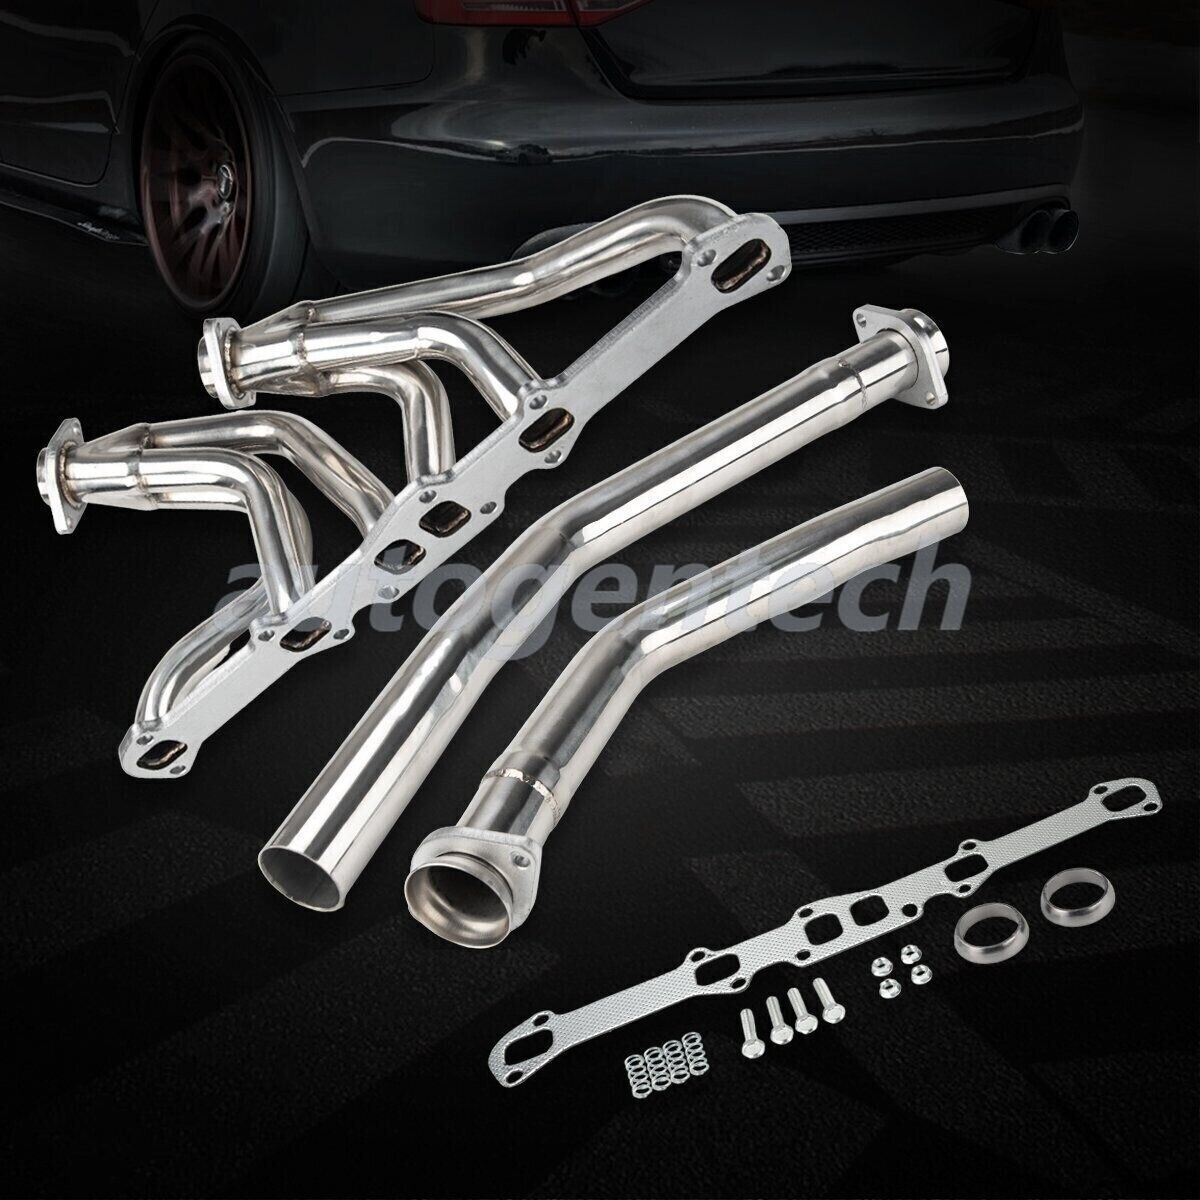 L6 144/170/200/250 STAINLESS STEEL HEADER MANIFOLD PIPE FOR 6CYL FORD/MERCURY